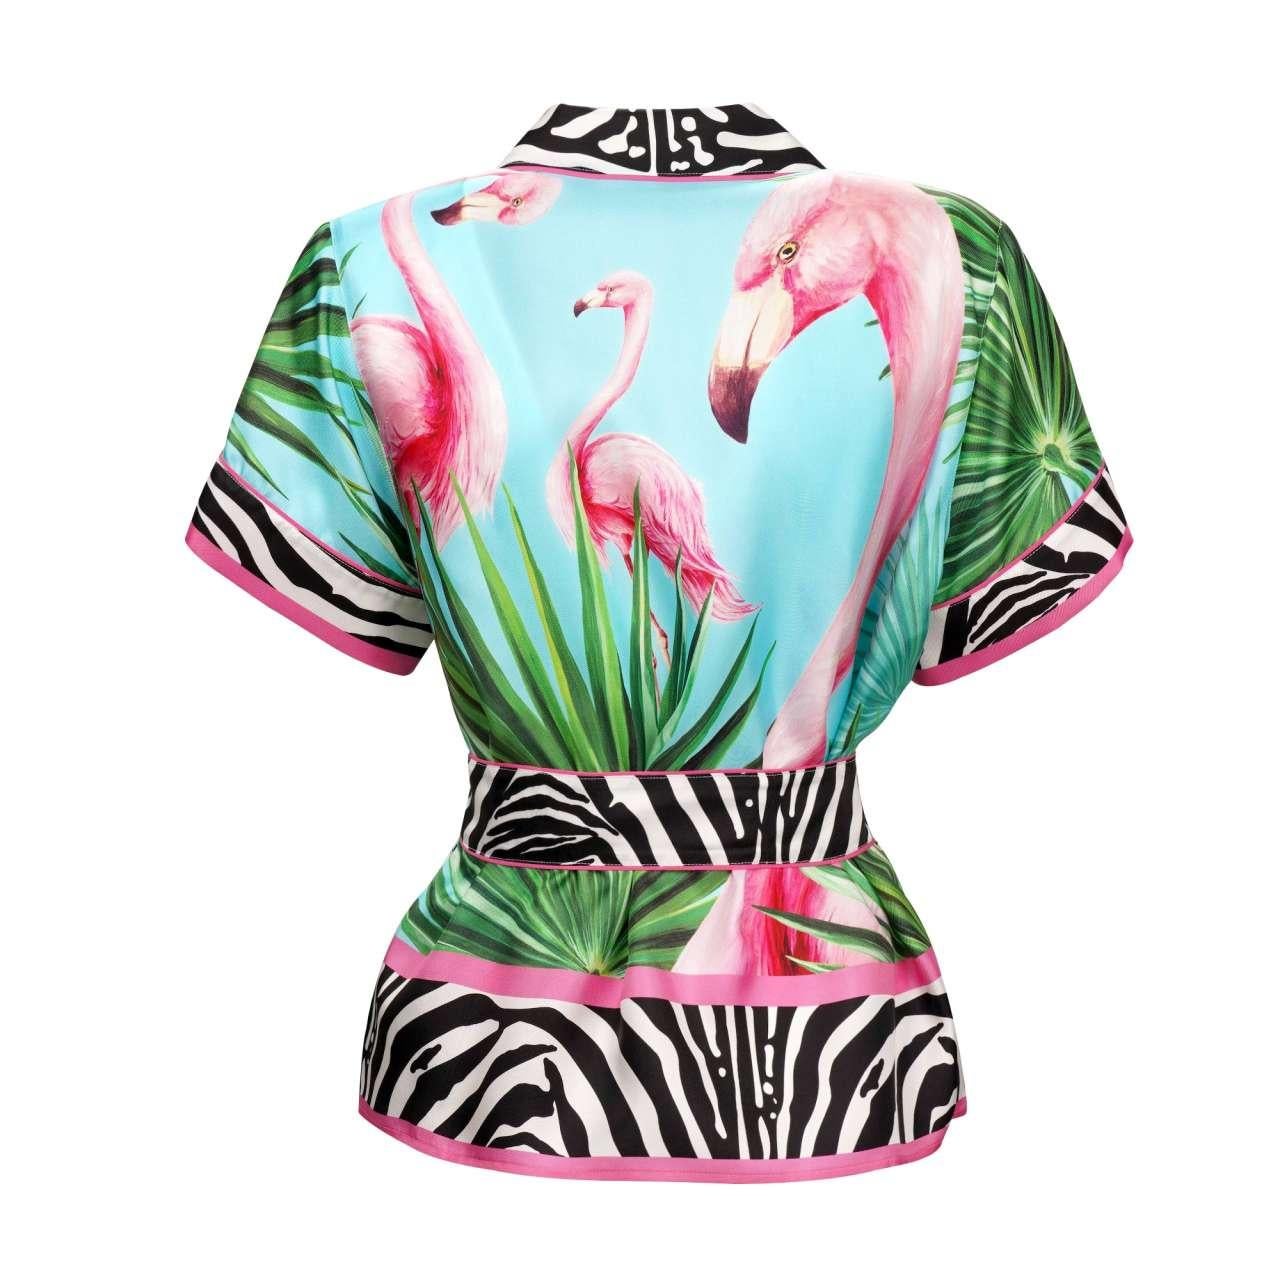 D&G - DJ Khaled Silk Flamingo Zebra Shirt Blouse with Sunglasses and CD 42 In Excellent Condition For Sale In Erkrath, DE